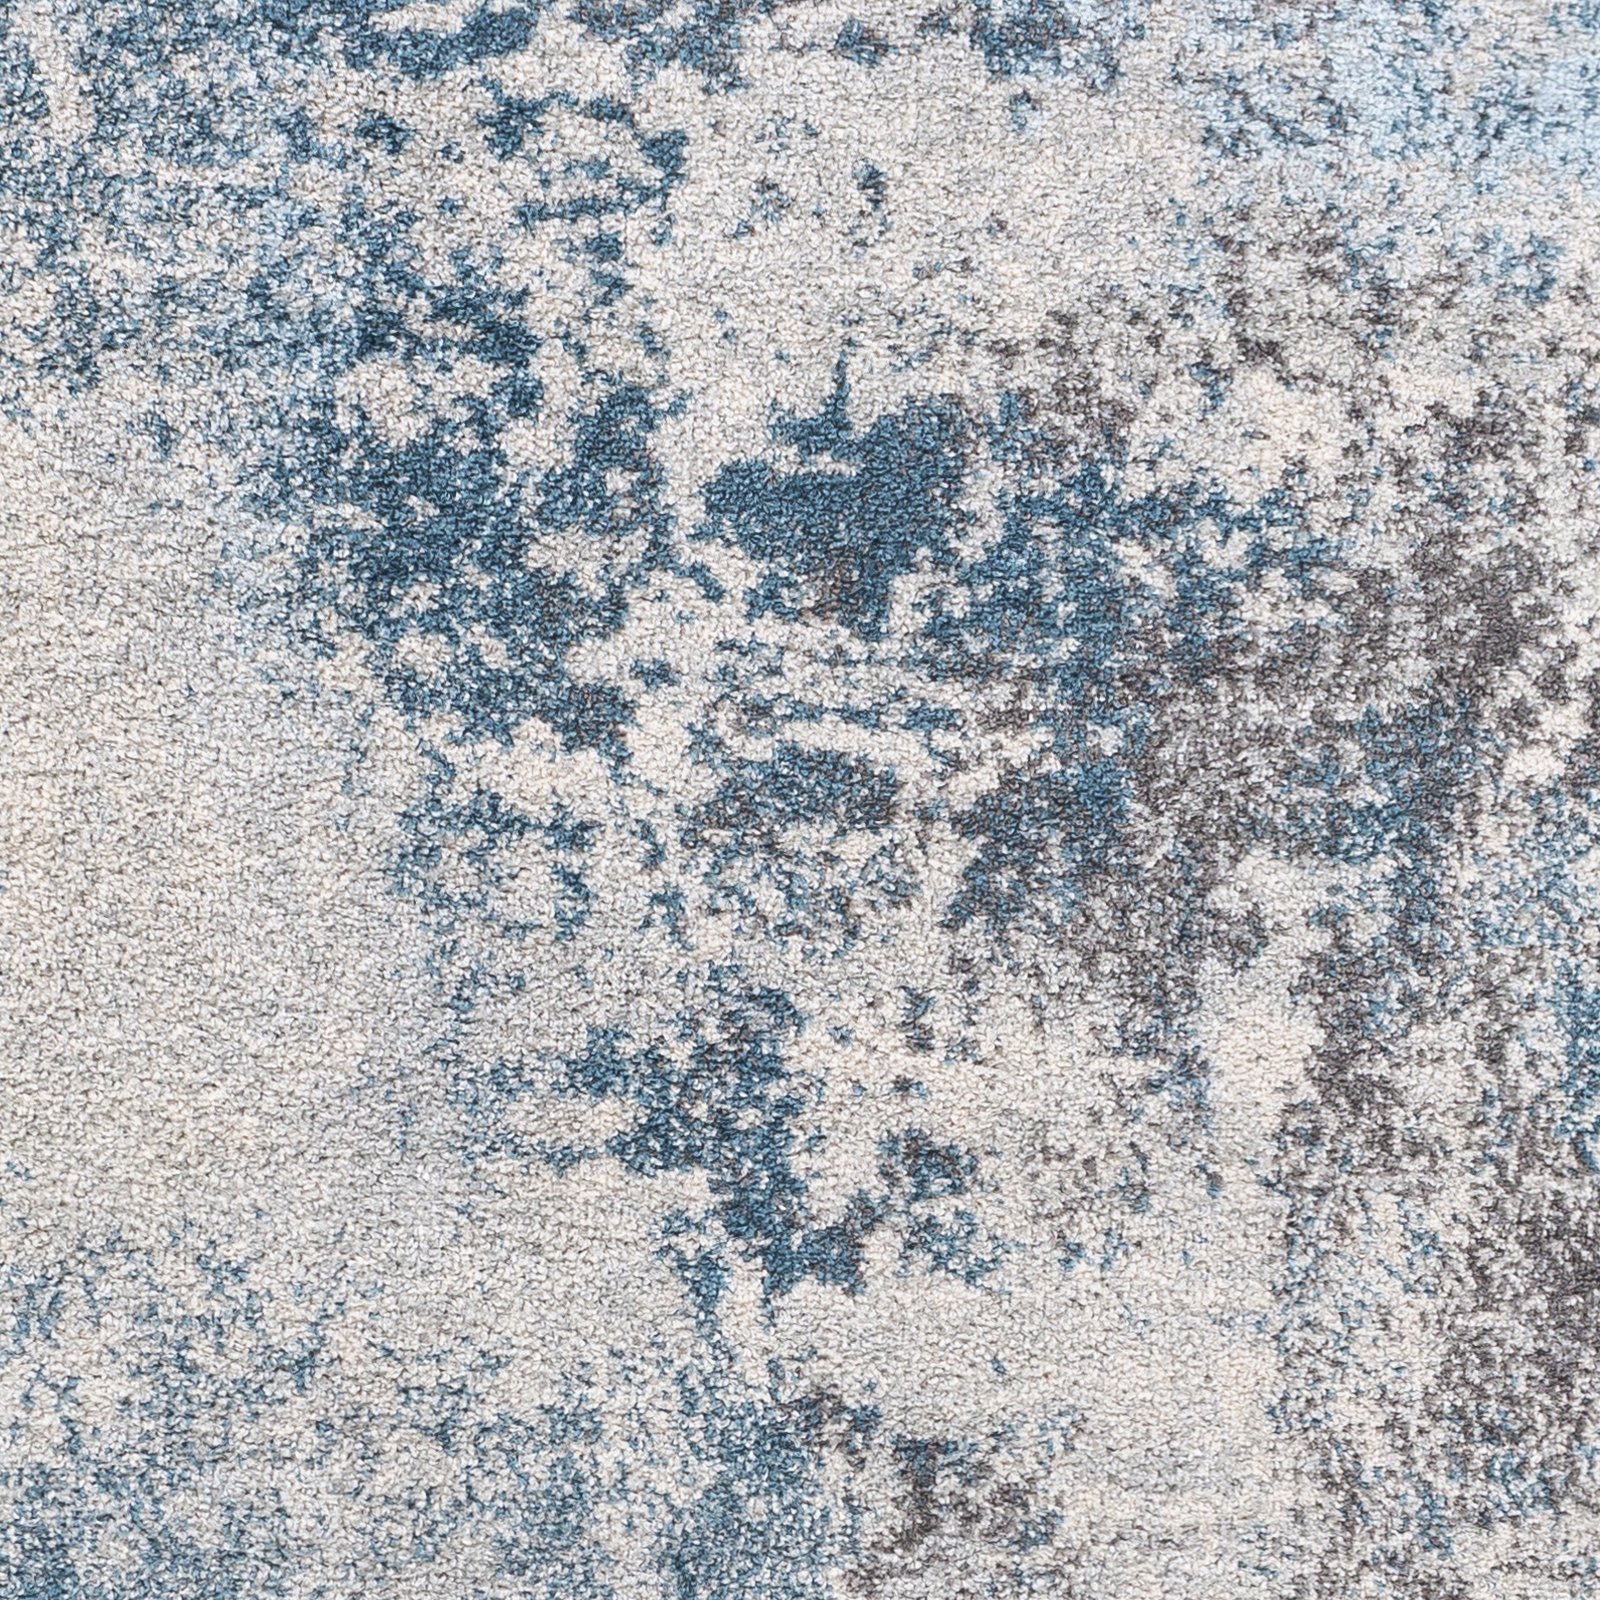 Chester Rug, 5'3" x 7'3" - Image 4